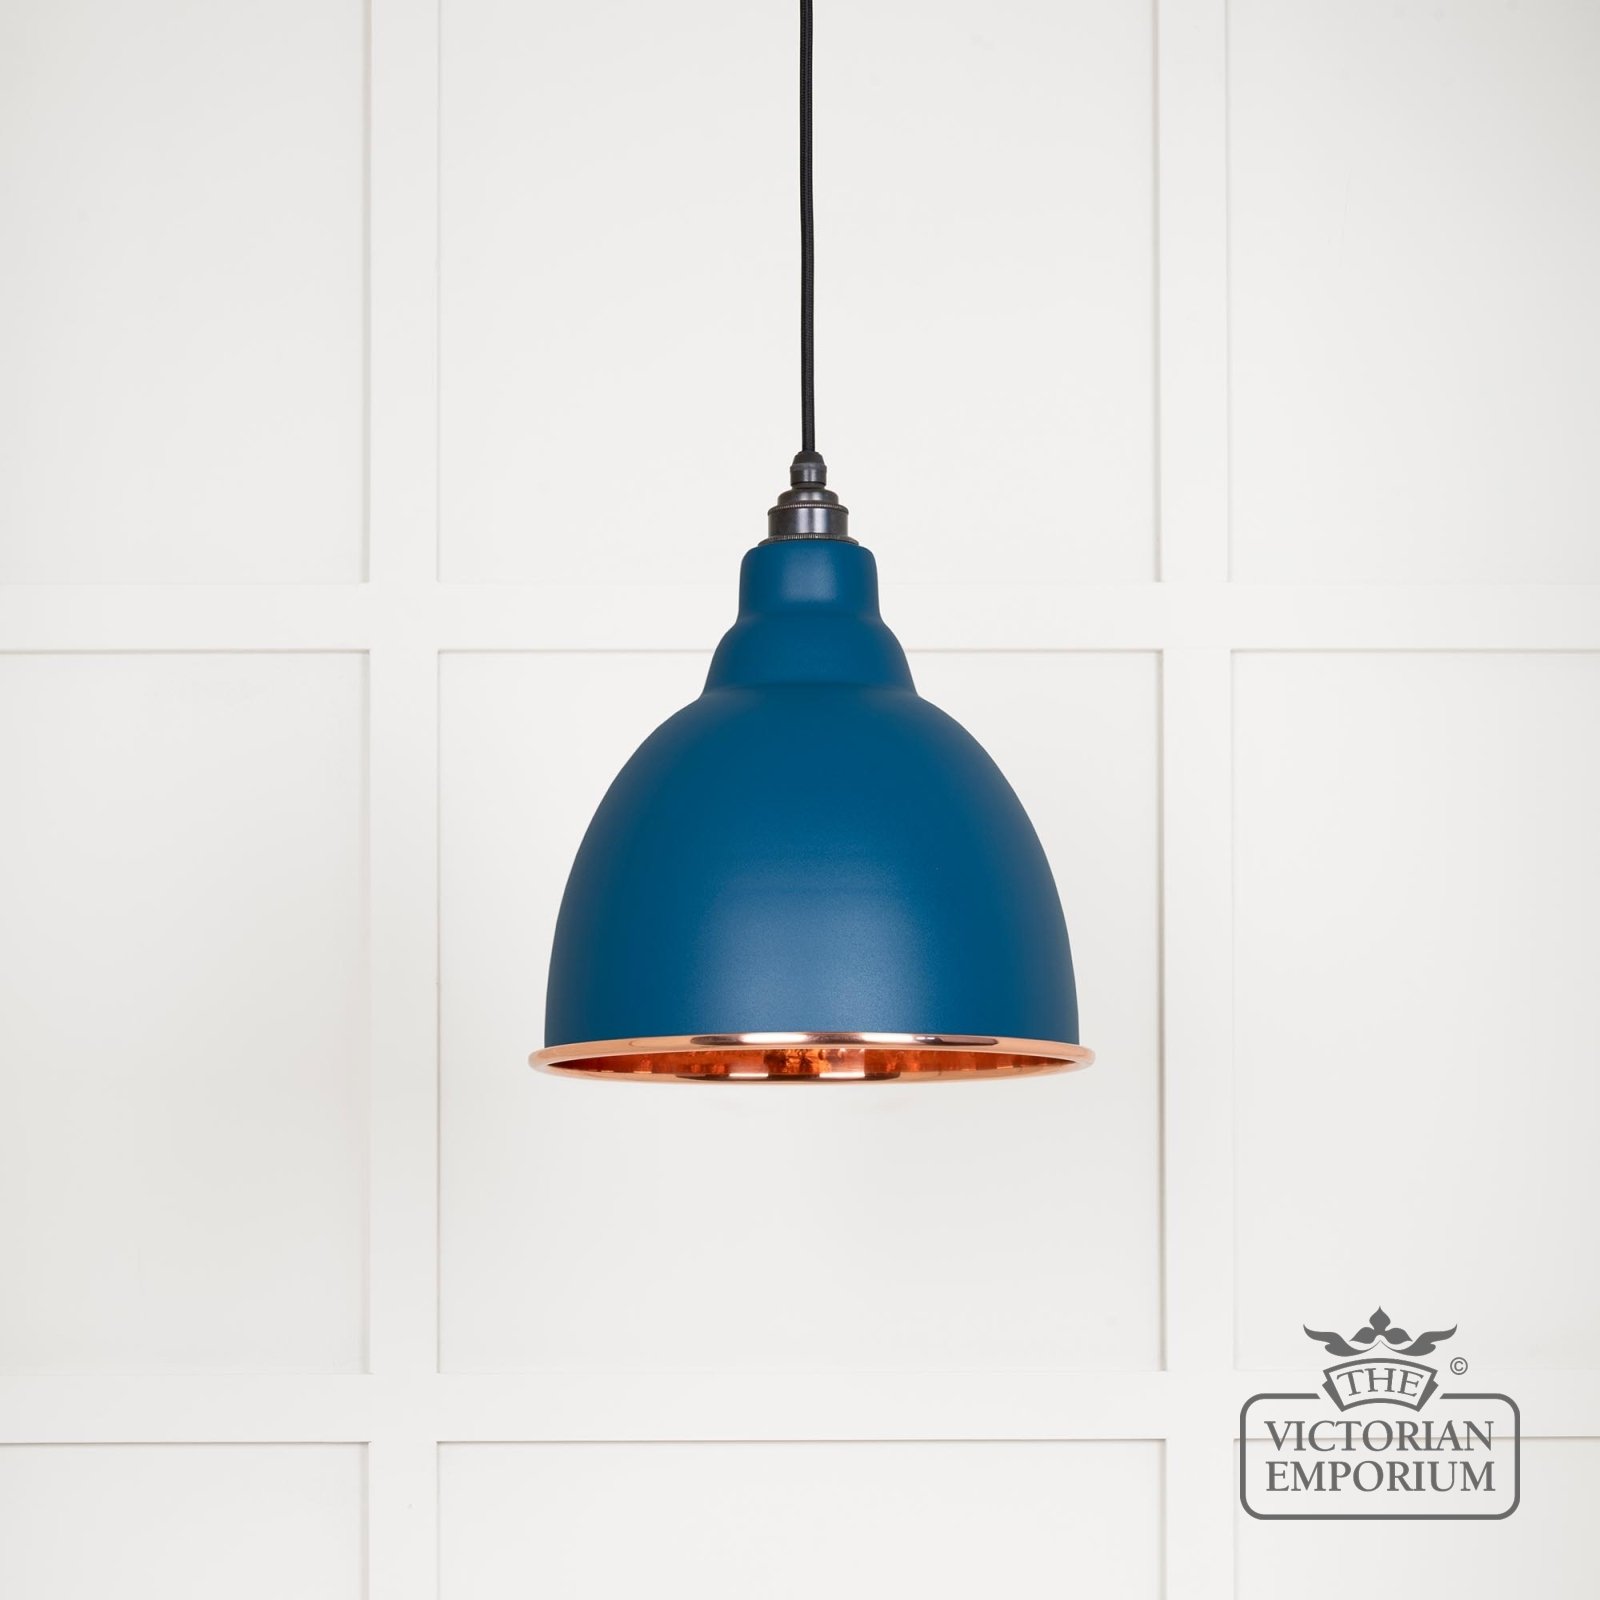 Brindle pendant light in Upstream with hammered copper interior